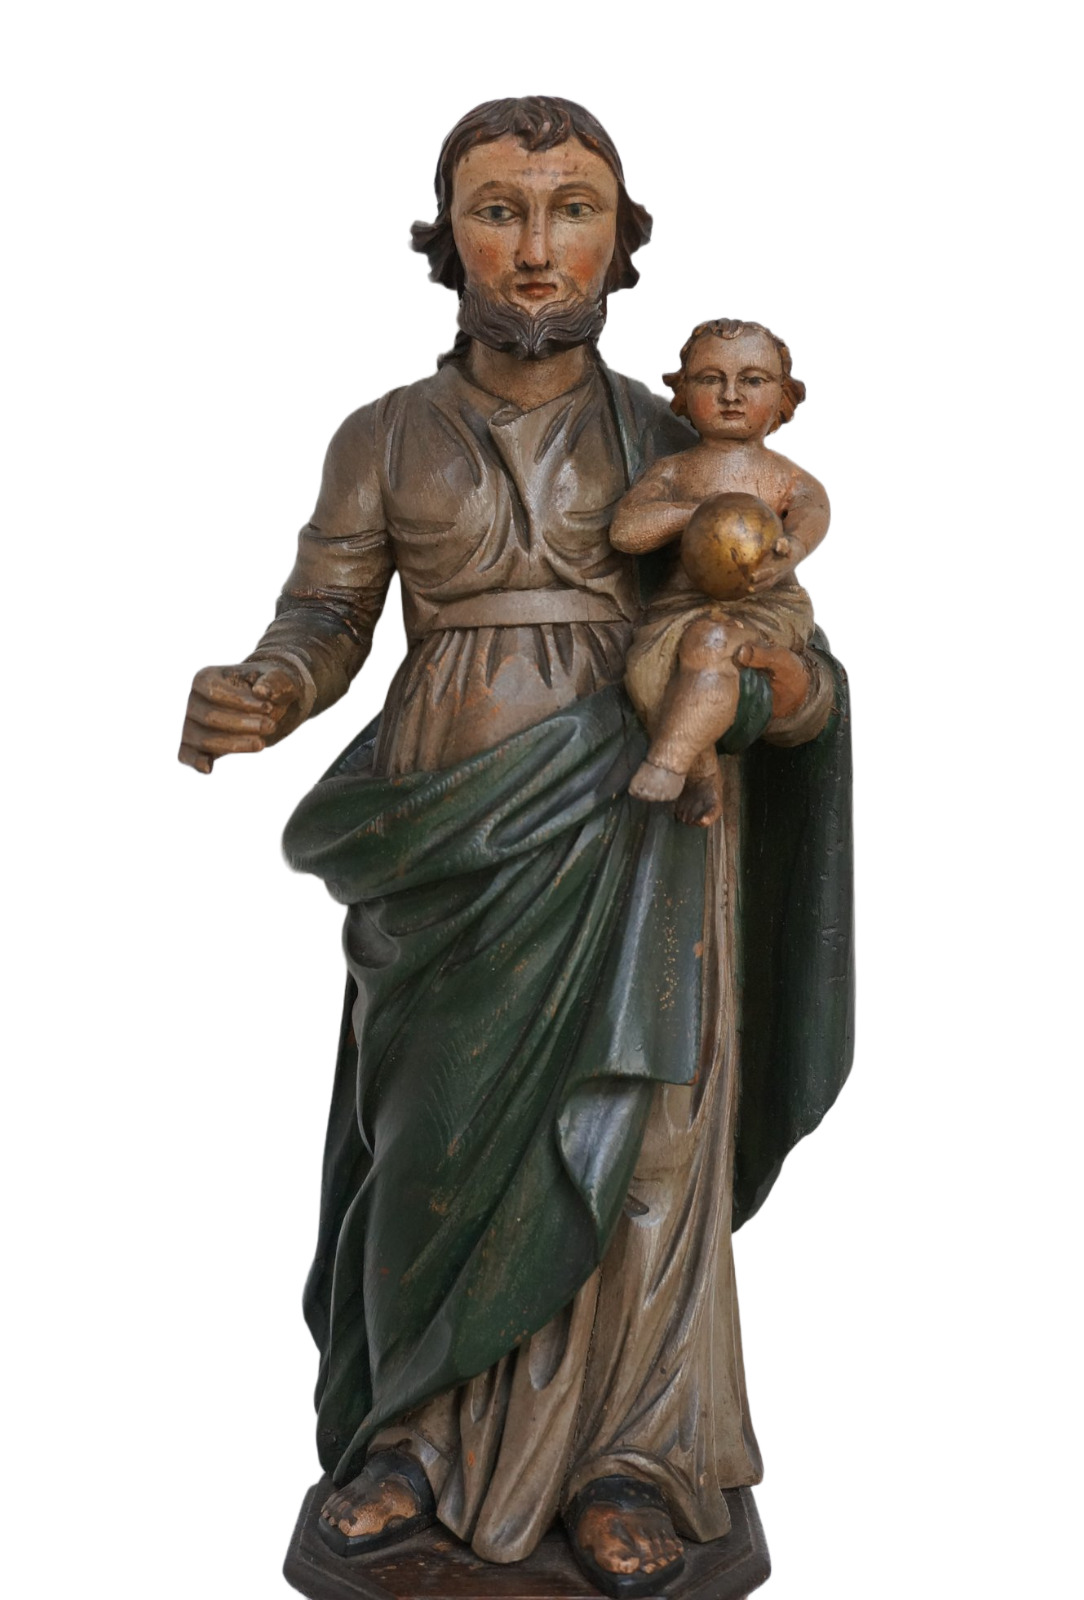 Polychrome wooden sculpture St. Joseph with the Child Jesus, colonial, ca. 1800